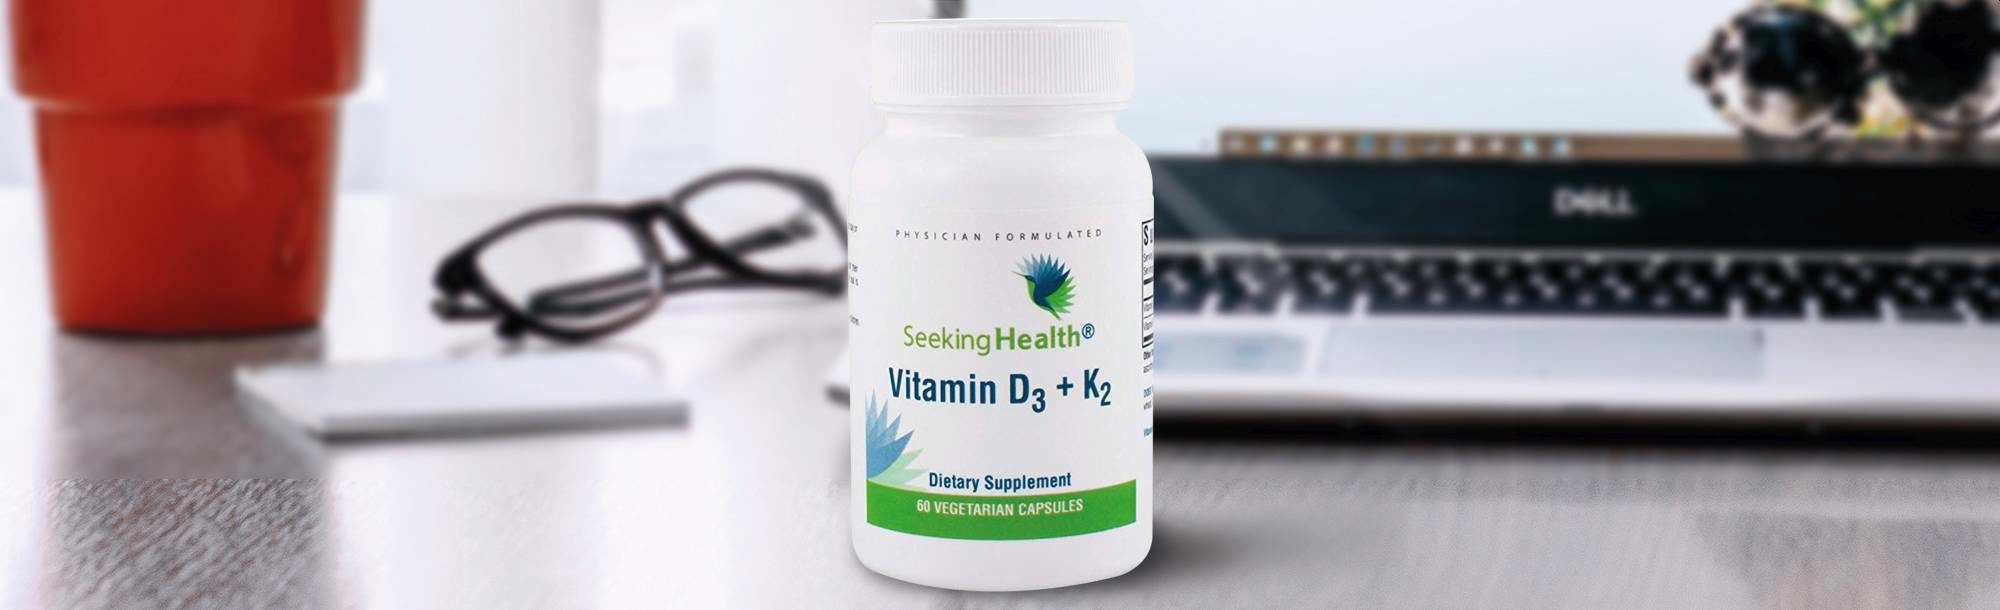 Vitamin D3 + K2 Review (Updated: 2020) | OneBrainReviews